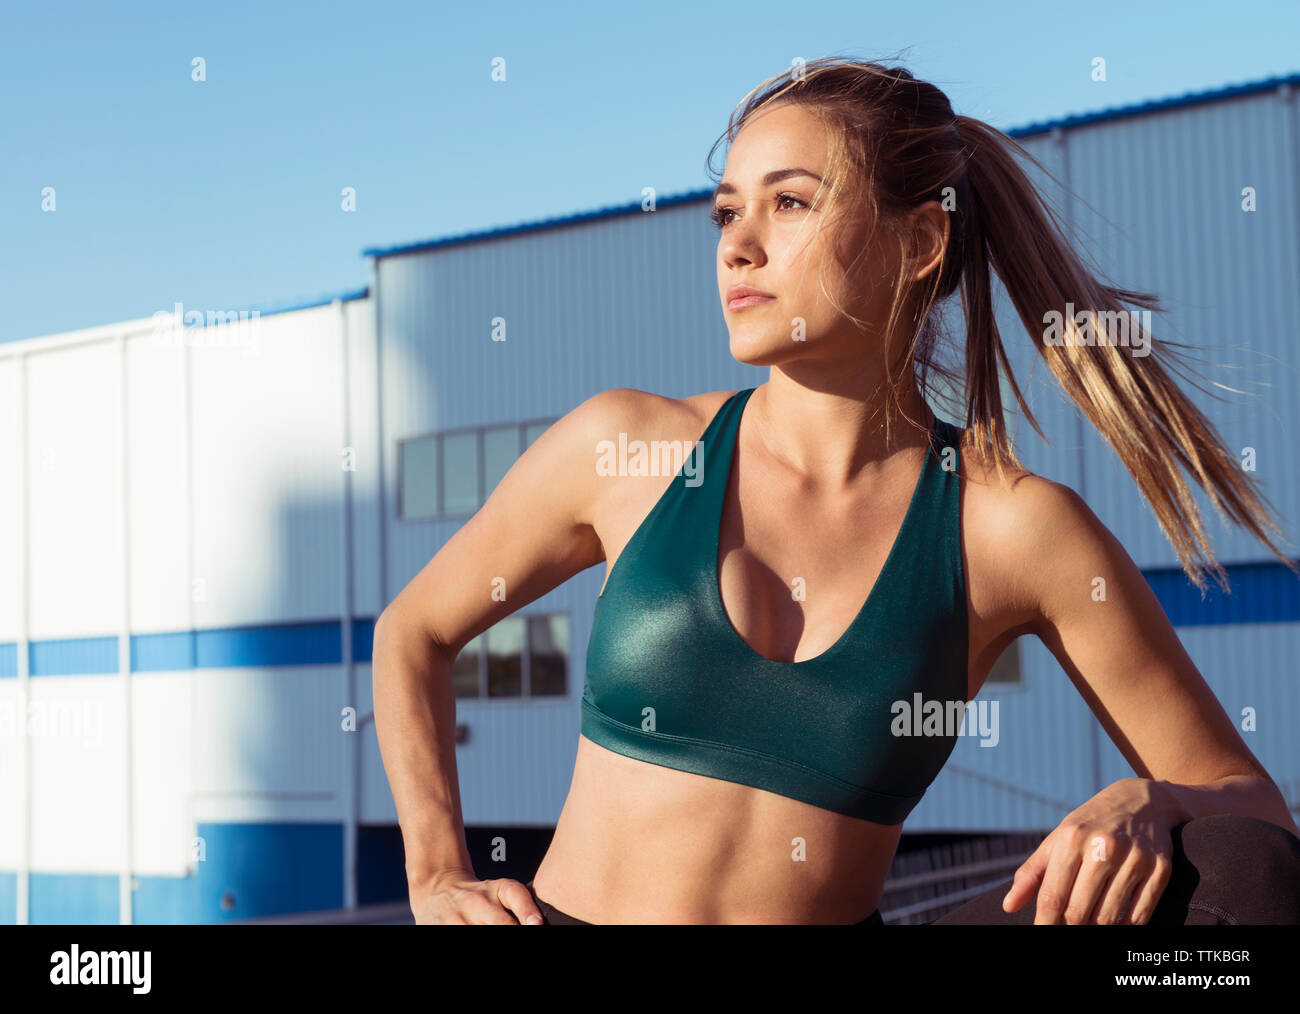 Thoughtful young woman wearing sports bra while standing against